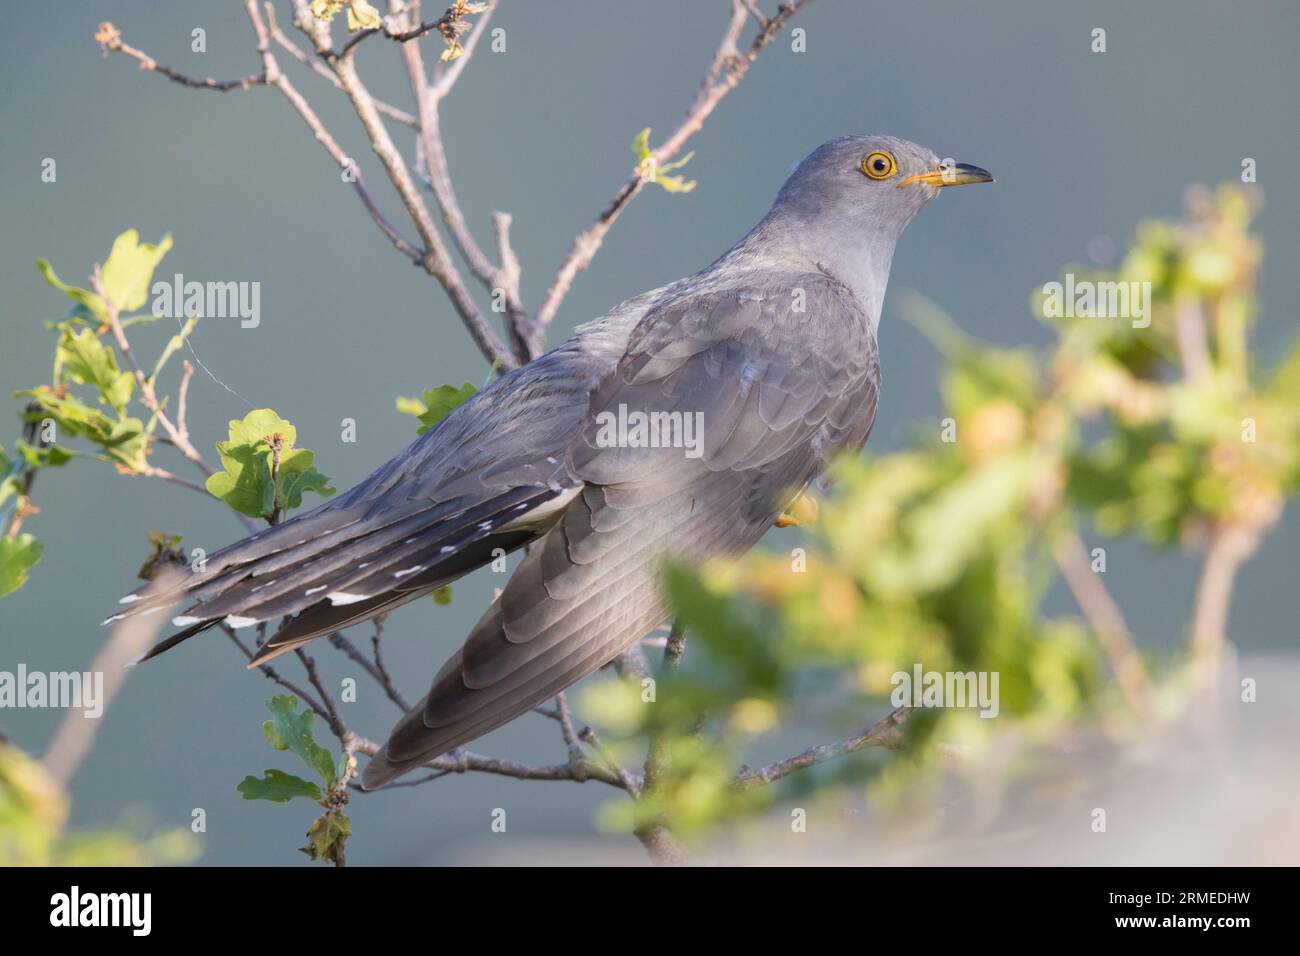 Common Cuckoo (Cuculus canorus), side view of an adult male perched on a branch, Campania, Italy Stock Photo